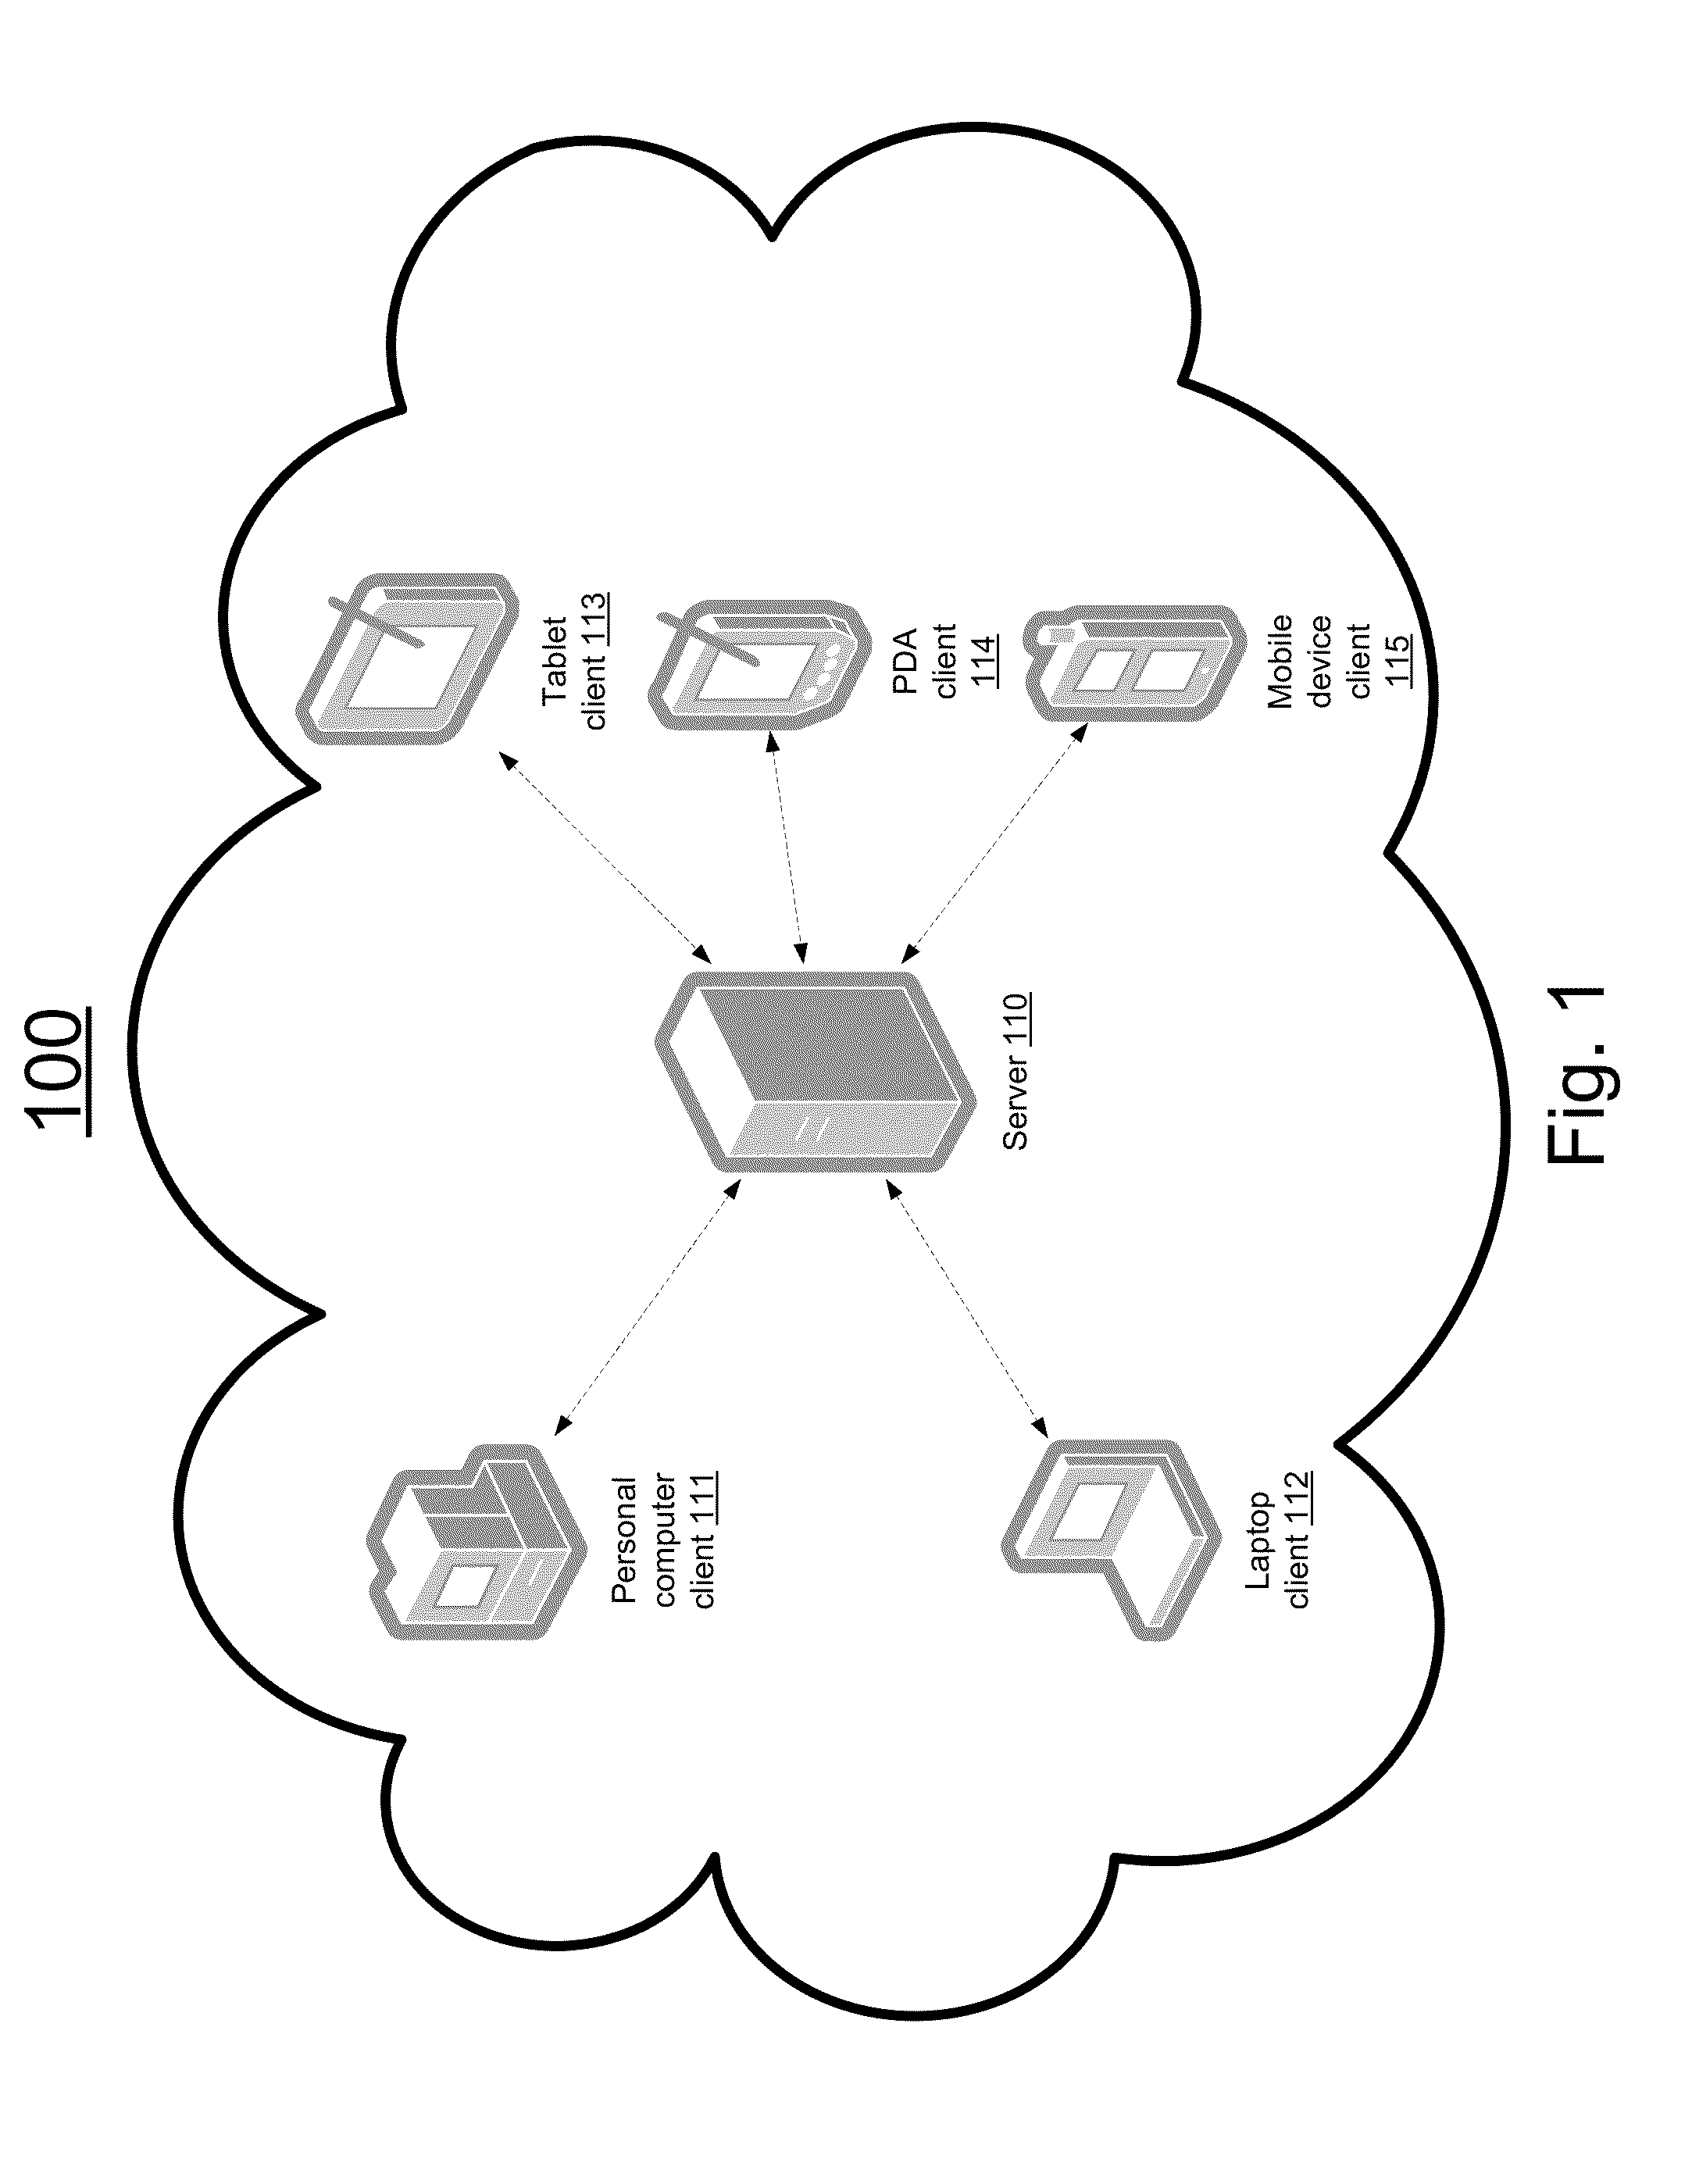 System and method for generating a virtual tour within a virtual environment